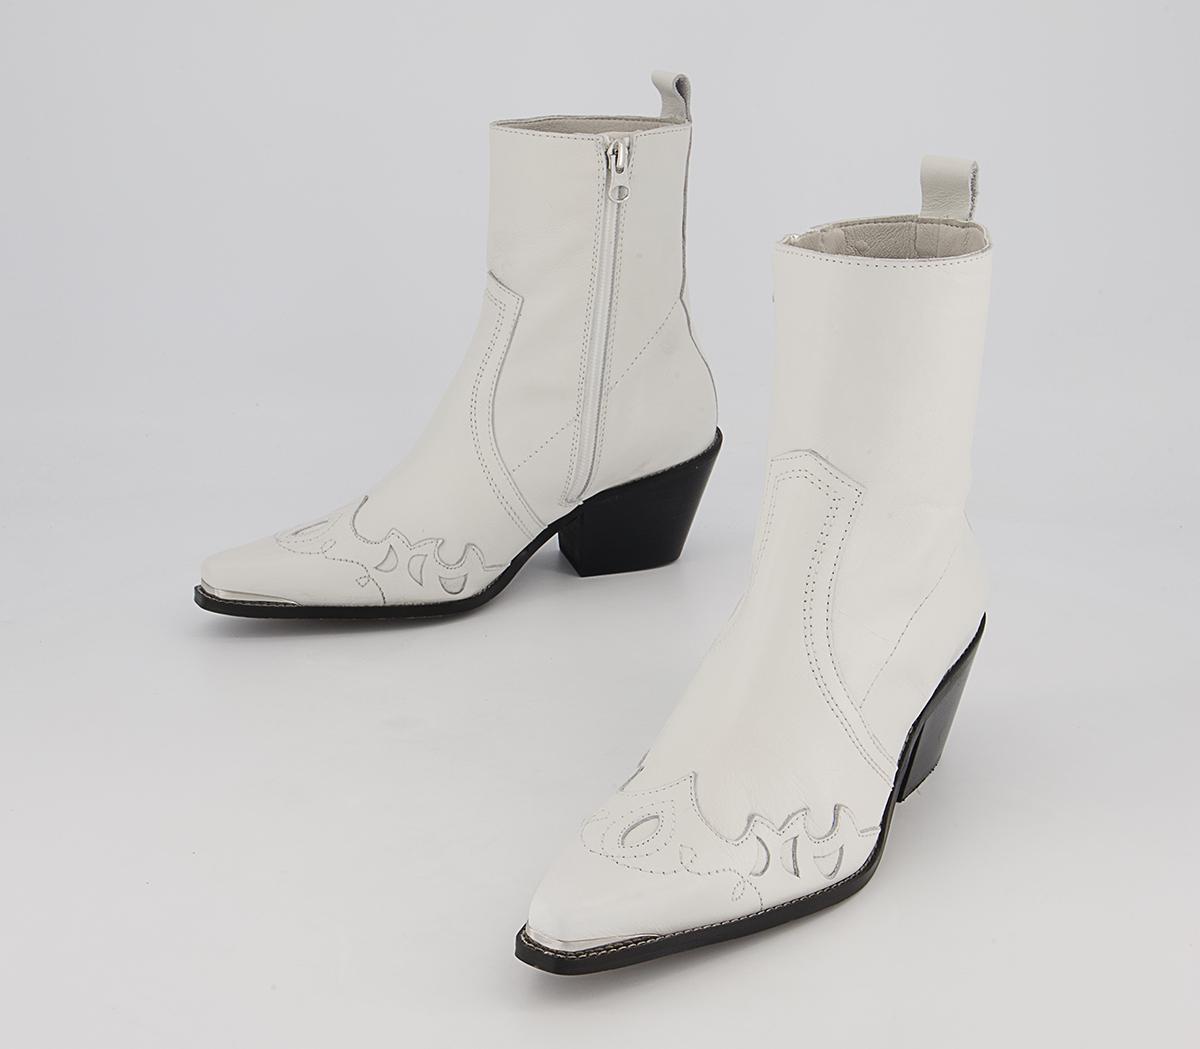 Albuquerque Western Heeled Ankle Boots
White Leather